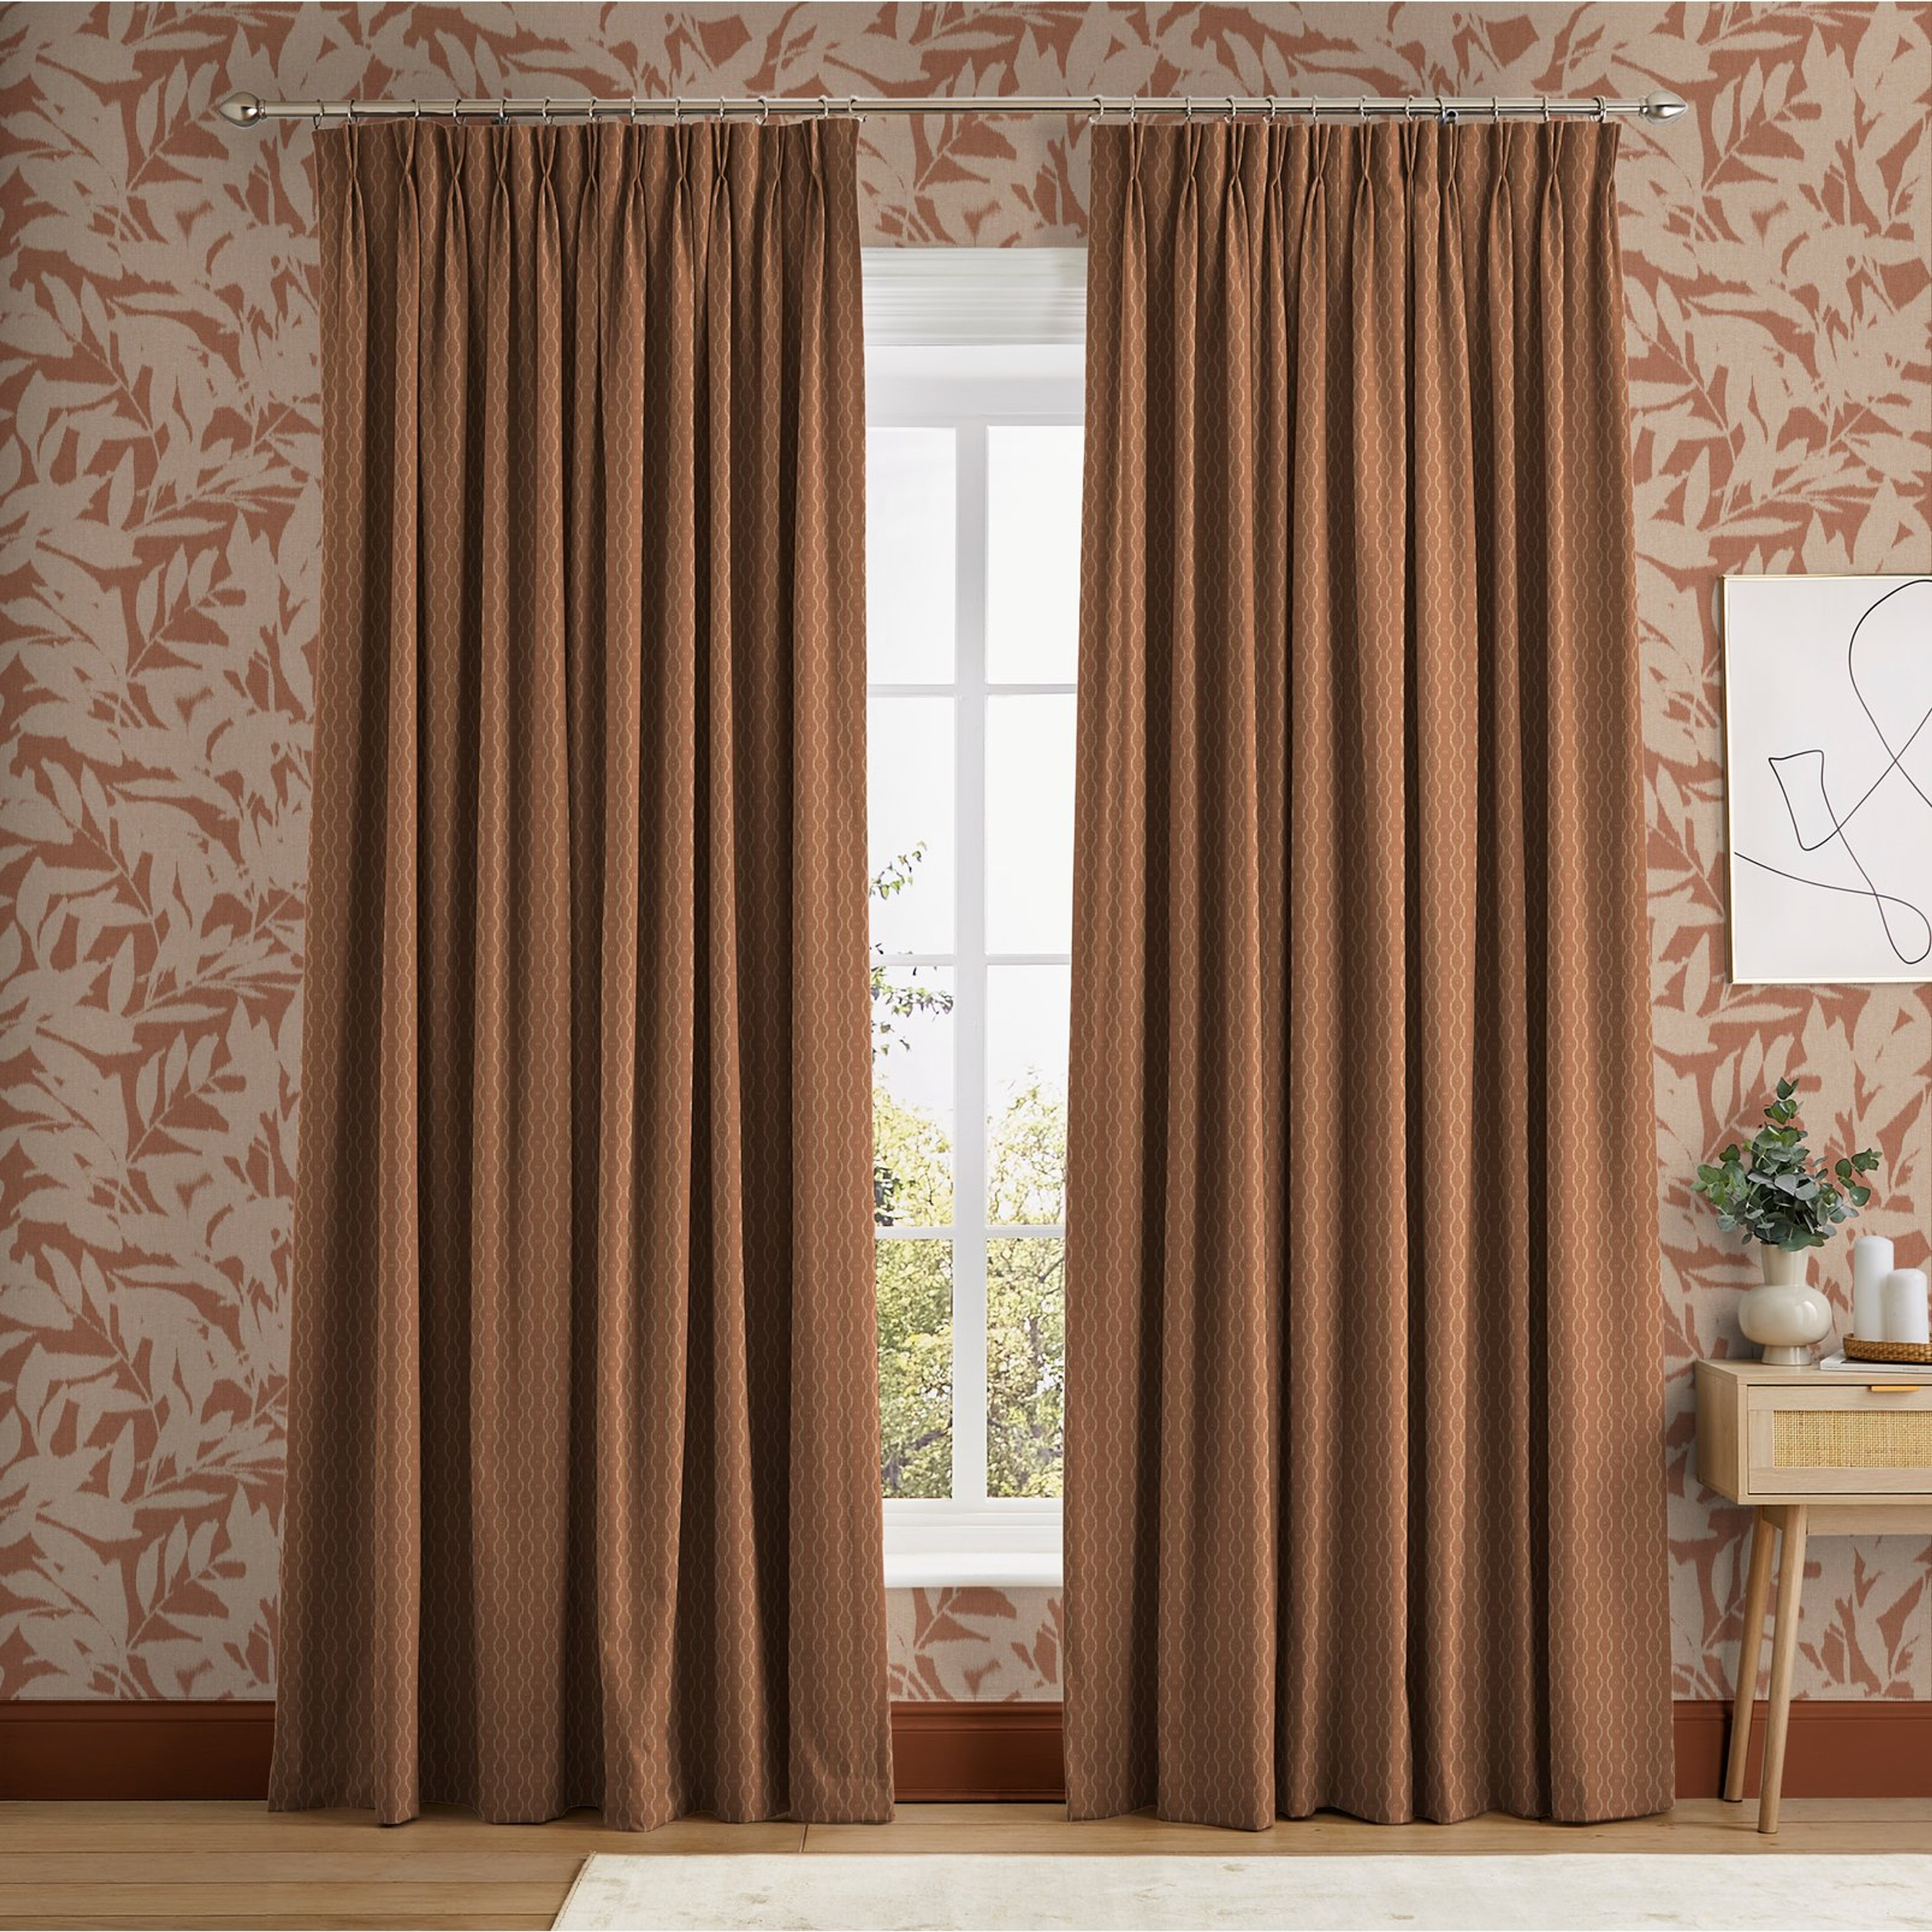 Rustic Ikat Clay Curtains